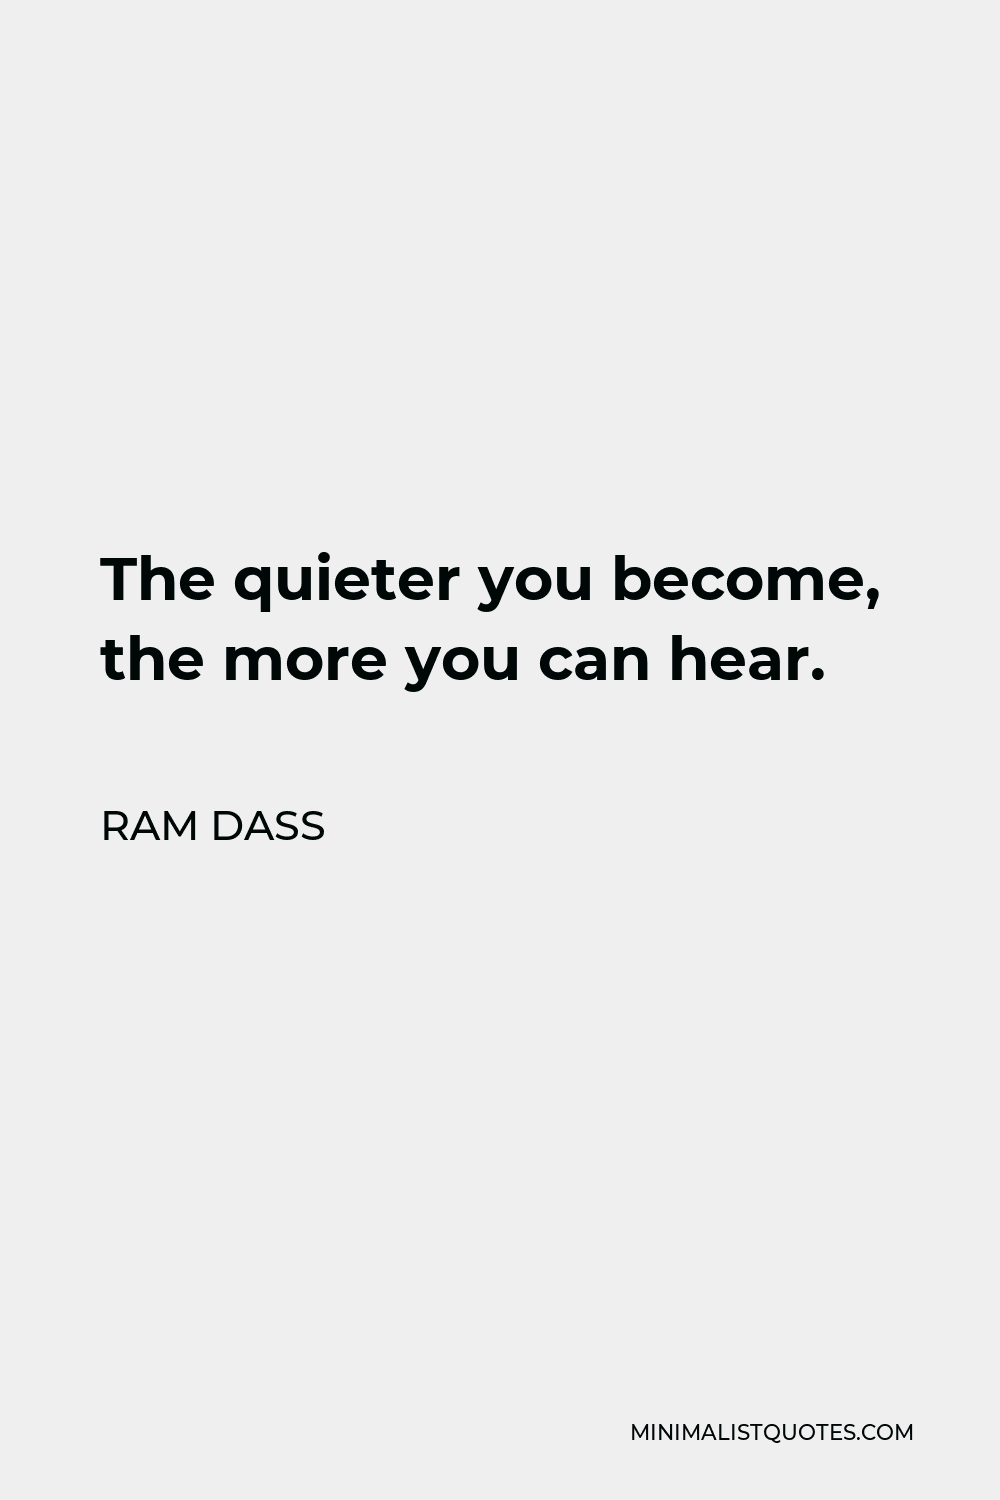 Ram Dass Quote - The quieter you become, the more you can hear.